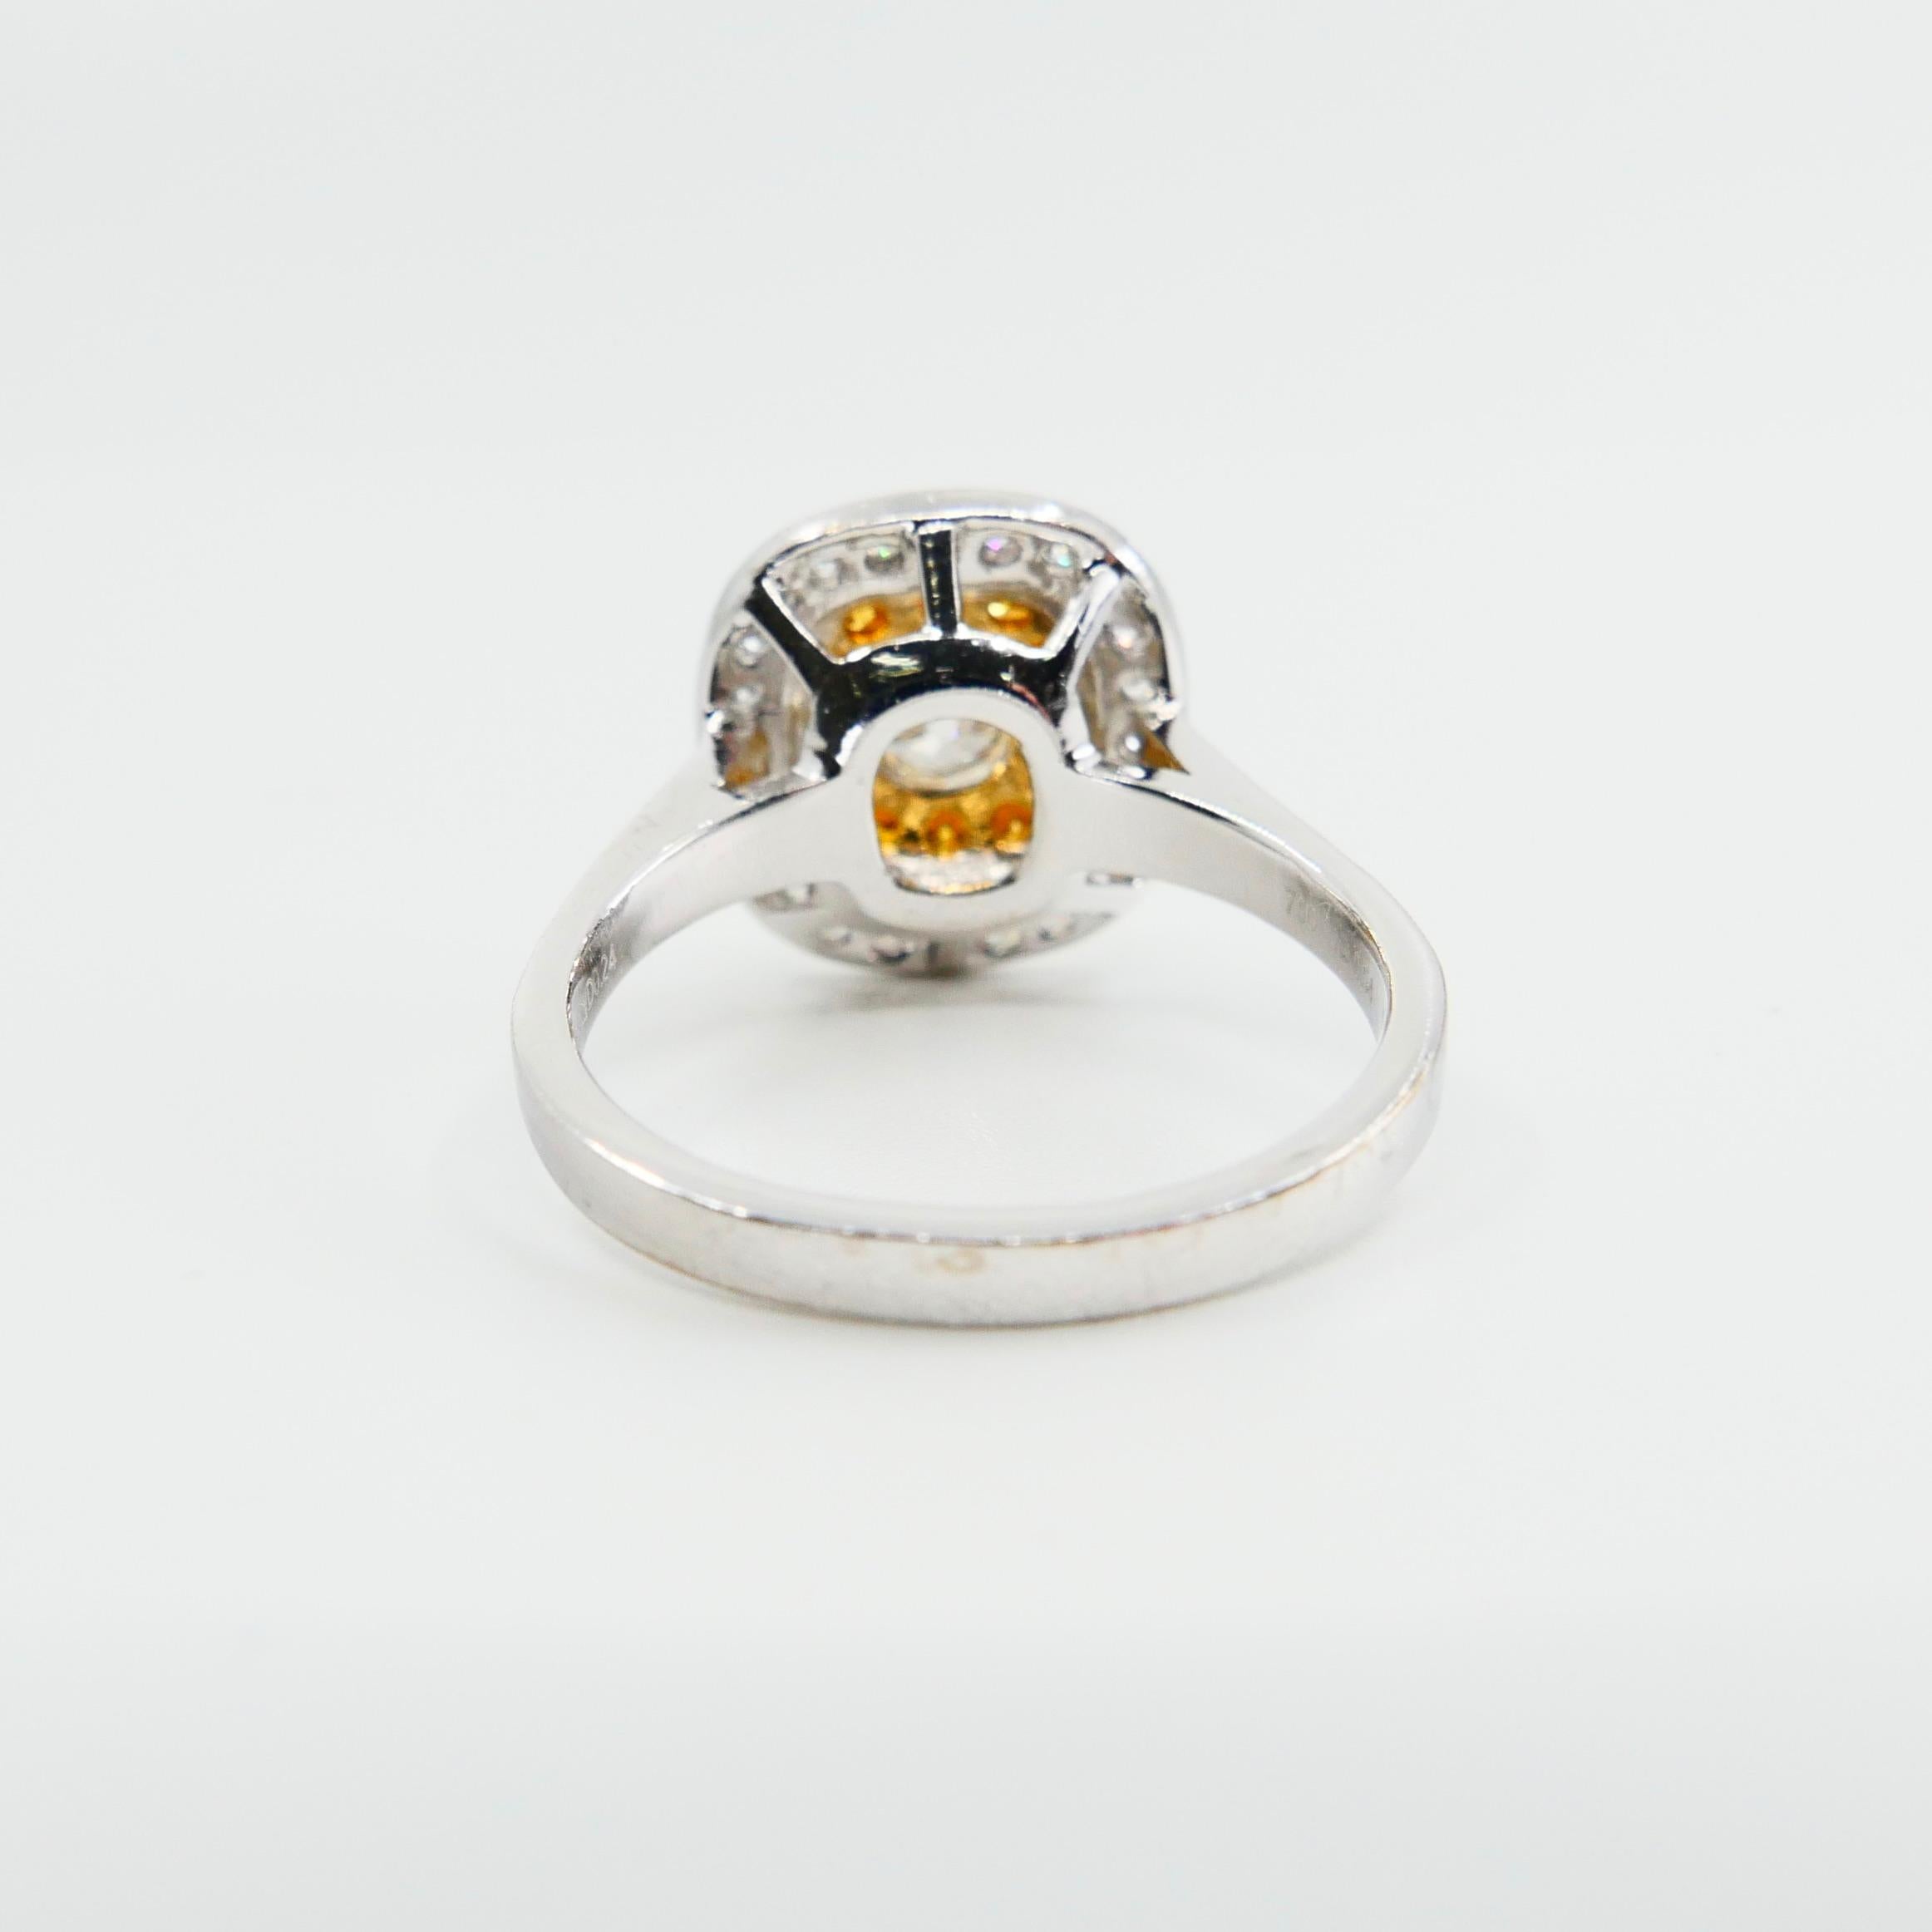 0.54 Cts Old Mine Cut & Fancy Vivid Yellow Diamond Cocktail Ring, 18K White Gold 3